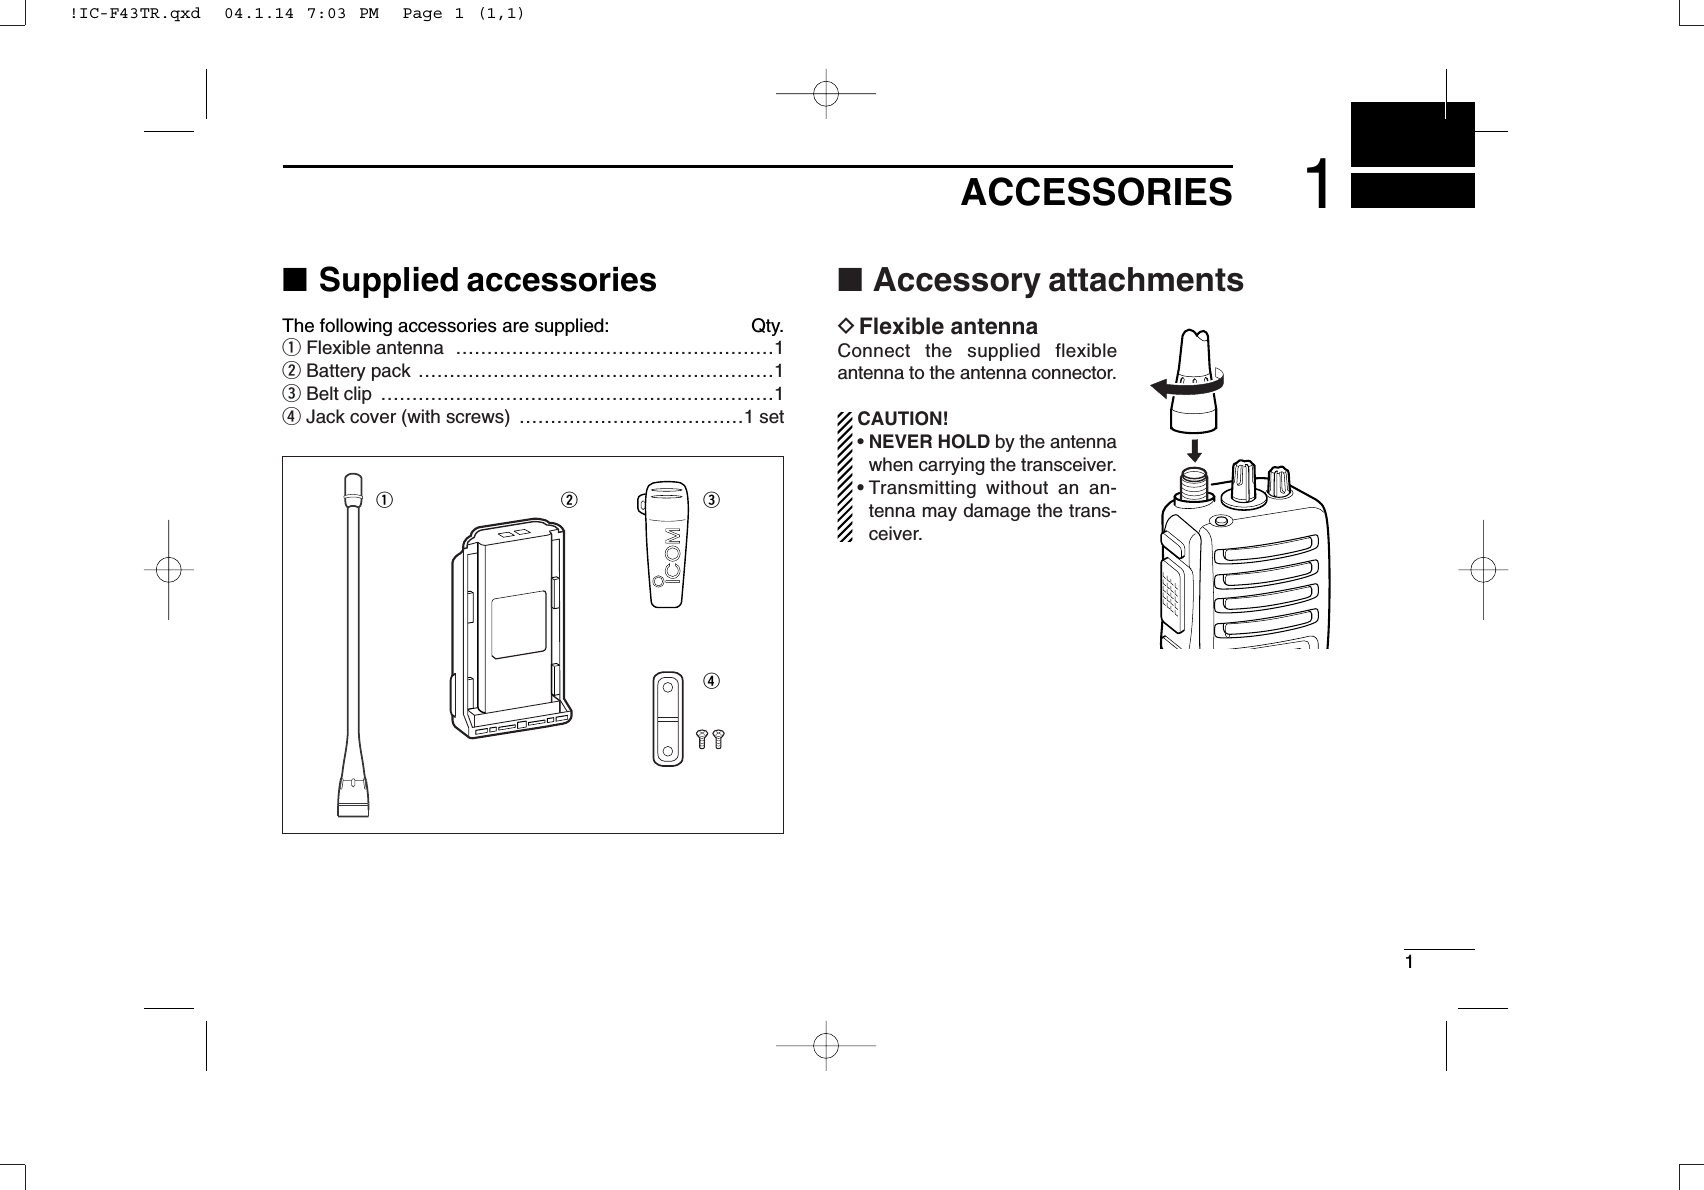 11ACCESSORIES■Supplied accessoriesThe following accessories are supplied: Qty.qFlexible antenna ……………………………………………1wBattery pack …………………………………………………1eBelt clip ………………………………………………………1rJack cover (with screws) ………………………………1 set■Accessory attachmentsDFlexible antennaConnect the supplied flexibleantenna to the antenna connector.CAUTION!• NEVER HOLD by the antennawhen carrying the transceiver.• Transmitting without an an-tenna may damage the trans-ceiver.qwer!IC-F43TR.qxd  04.1.14 7:03 PM  Page 1 (1,1)